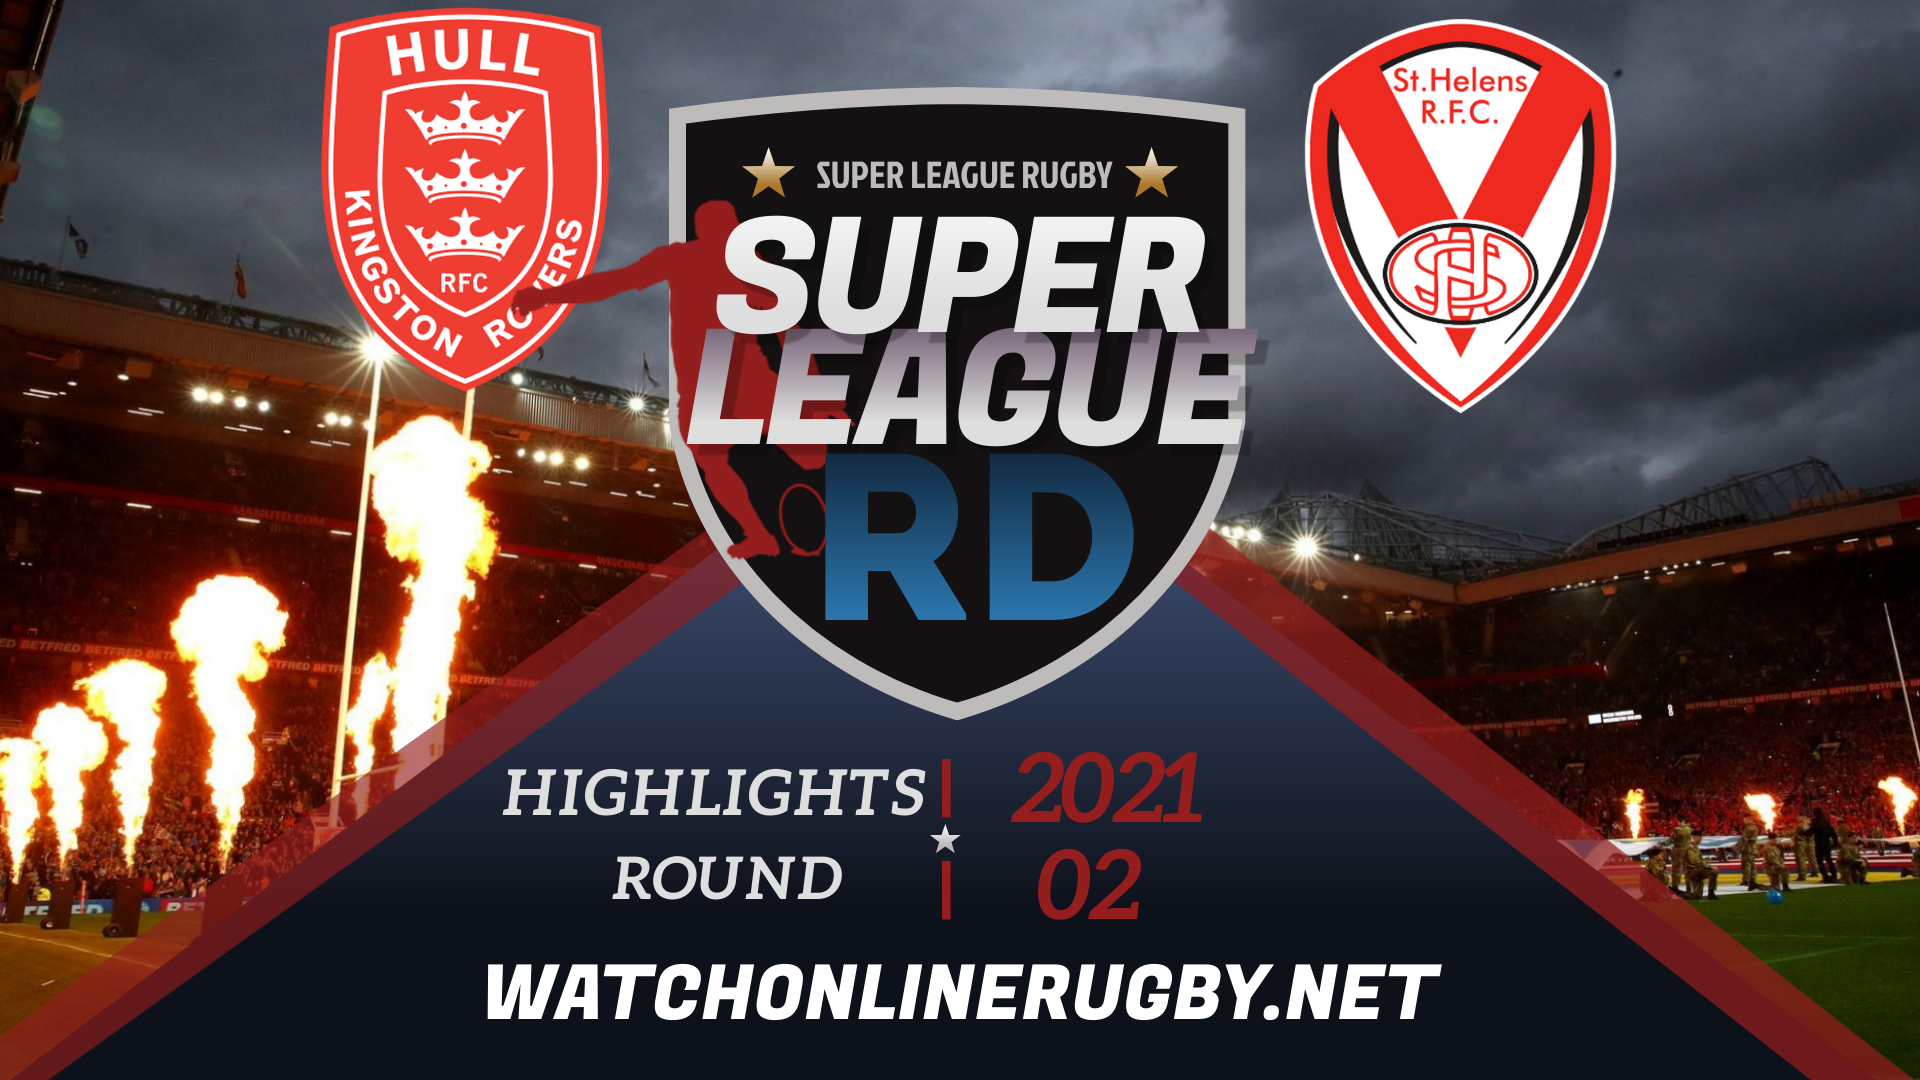 Hull KR Vs St Helens Super League Rugby 2021 RD 2